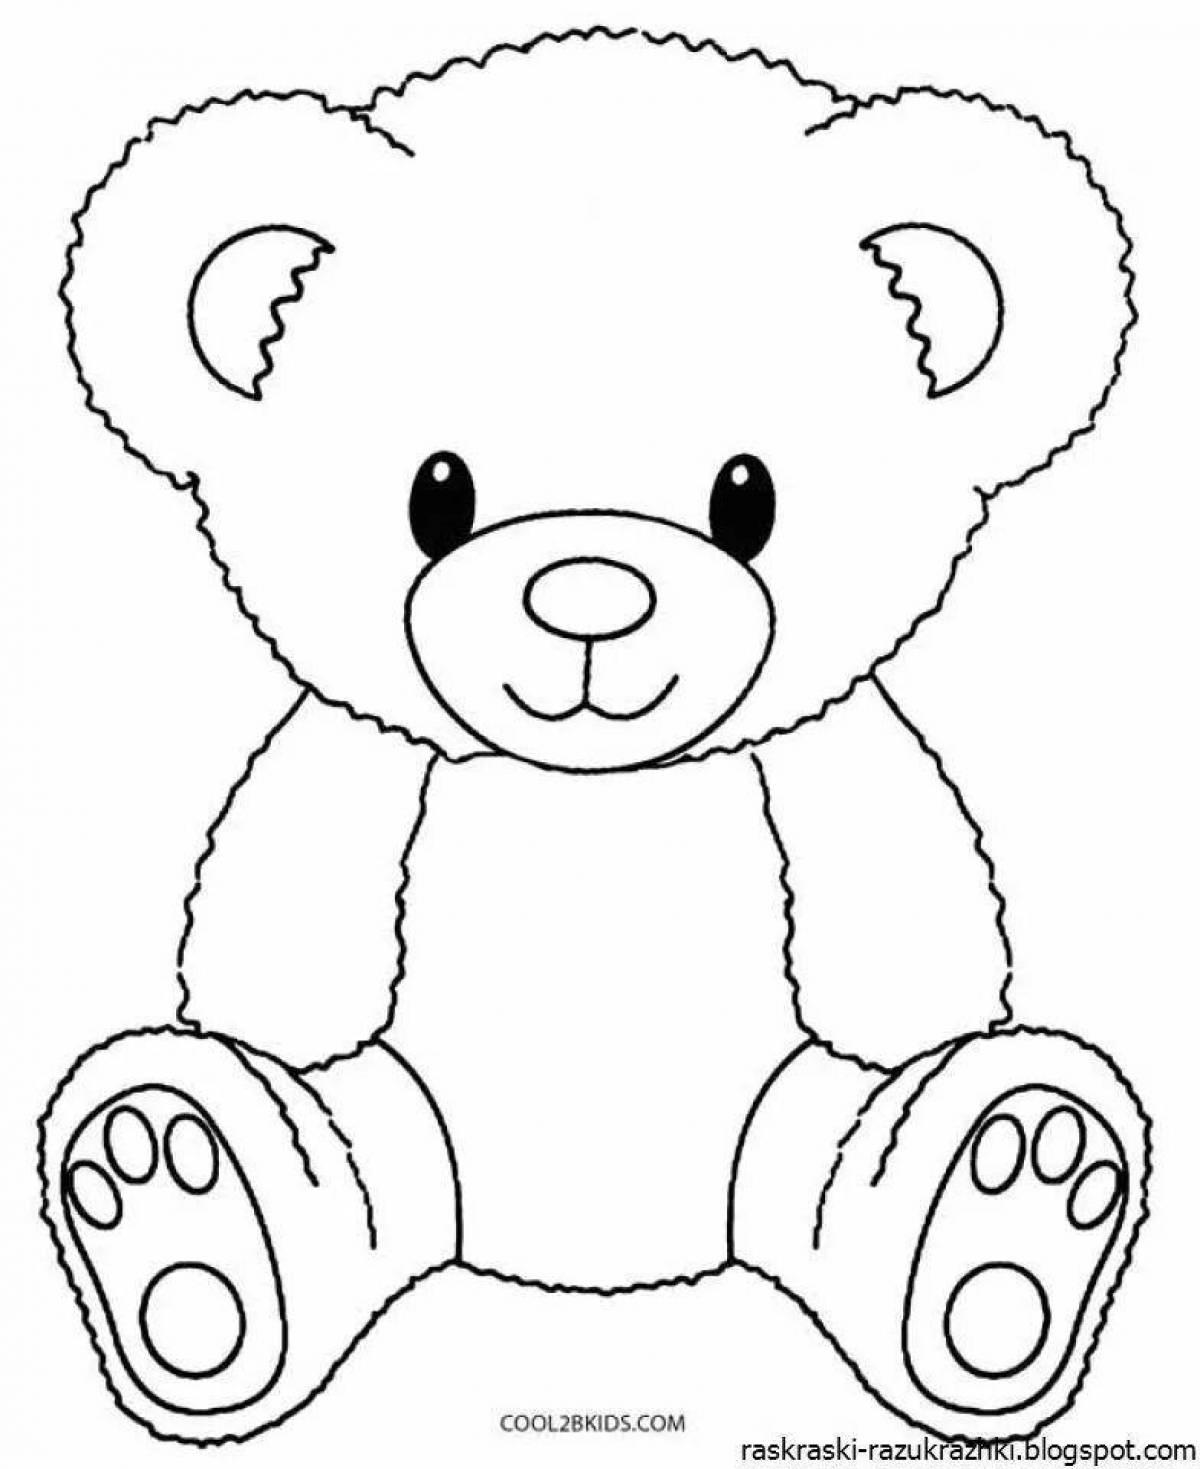 Adorable teddy bear coloring book for kids